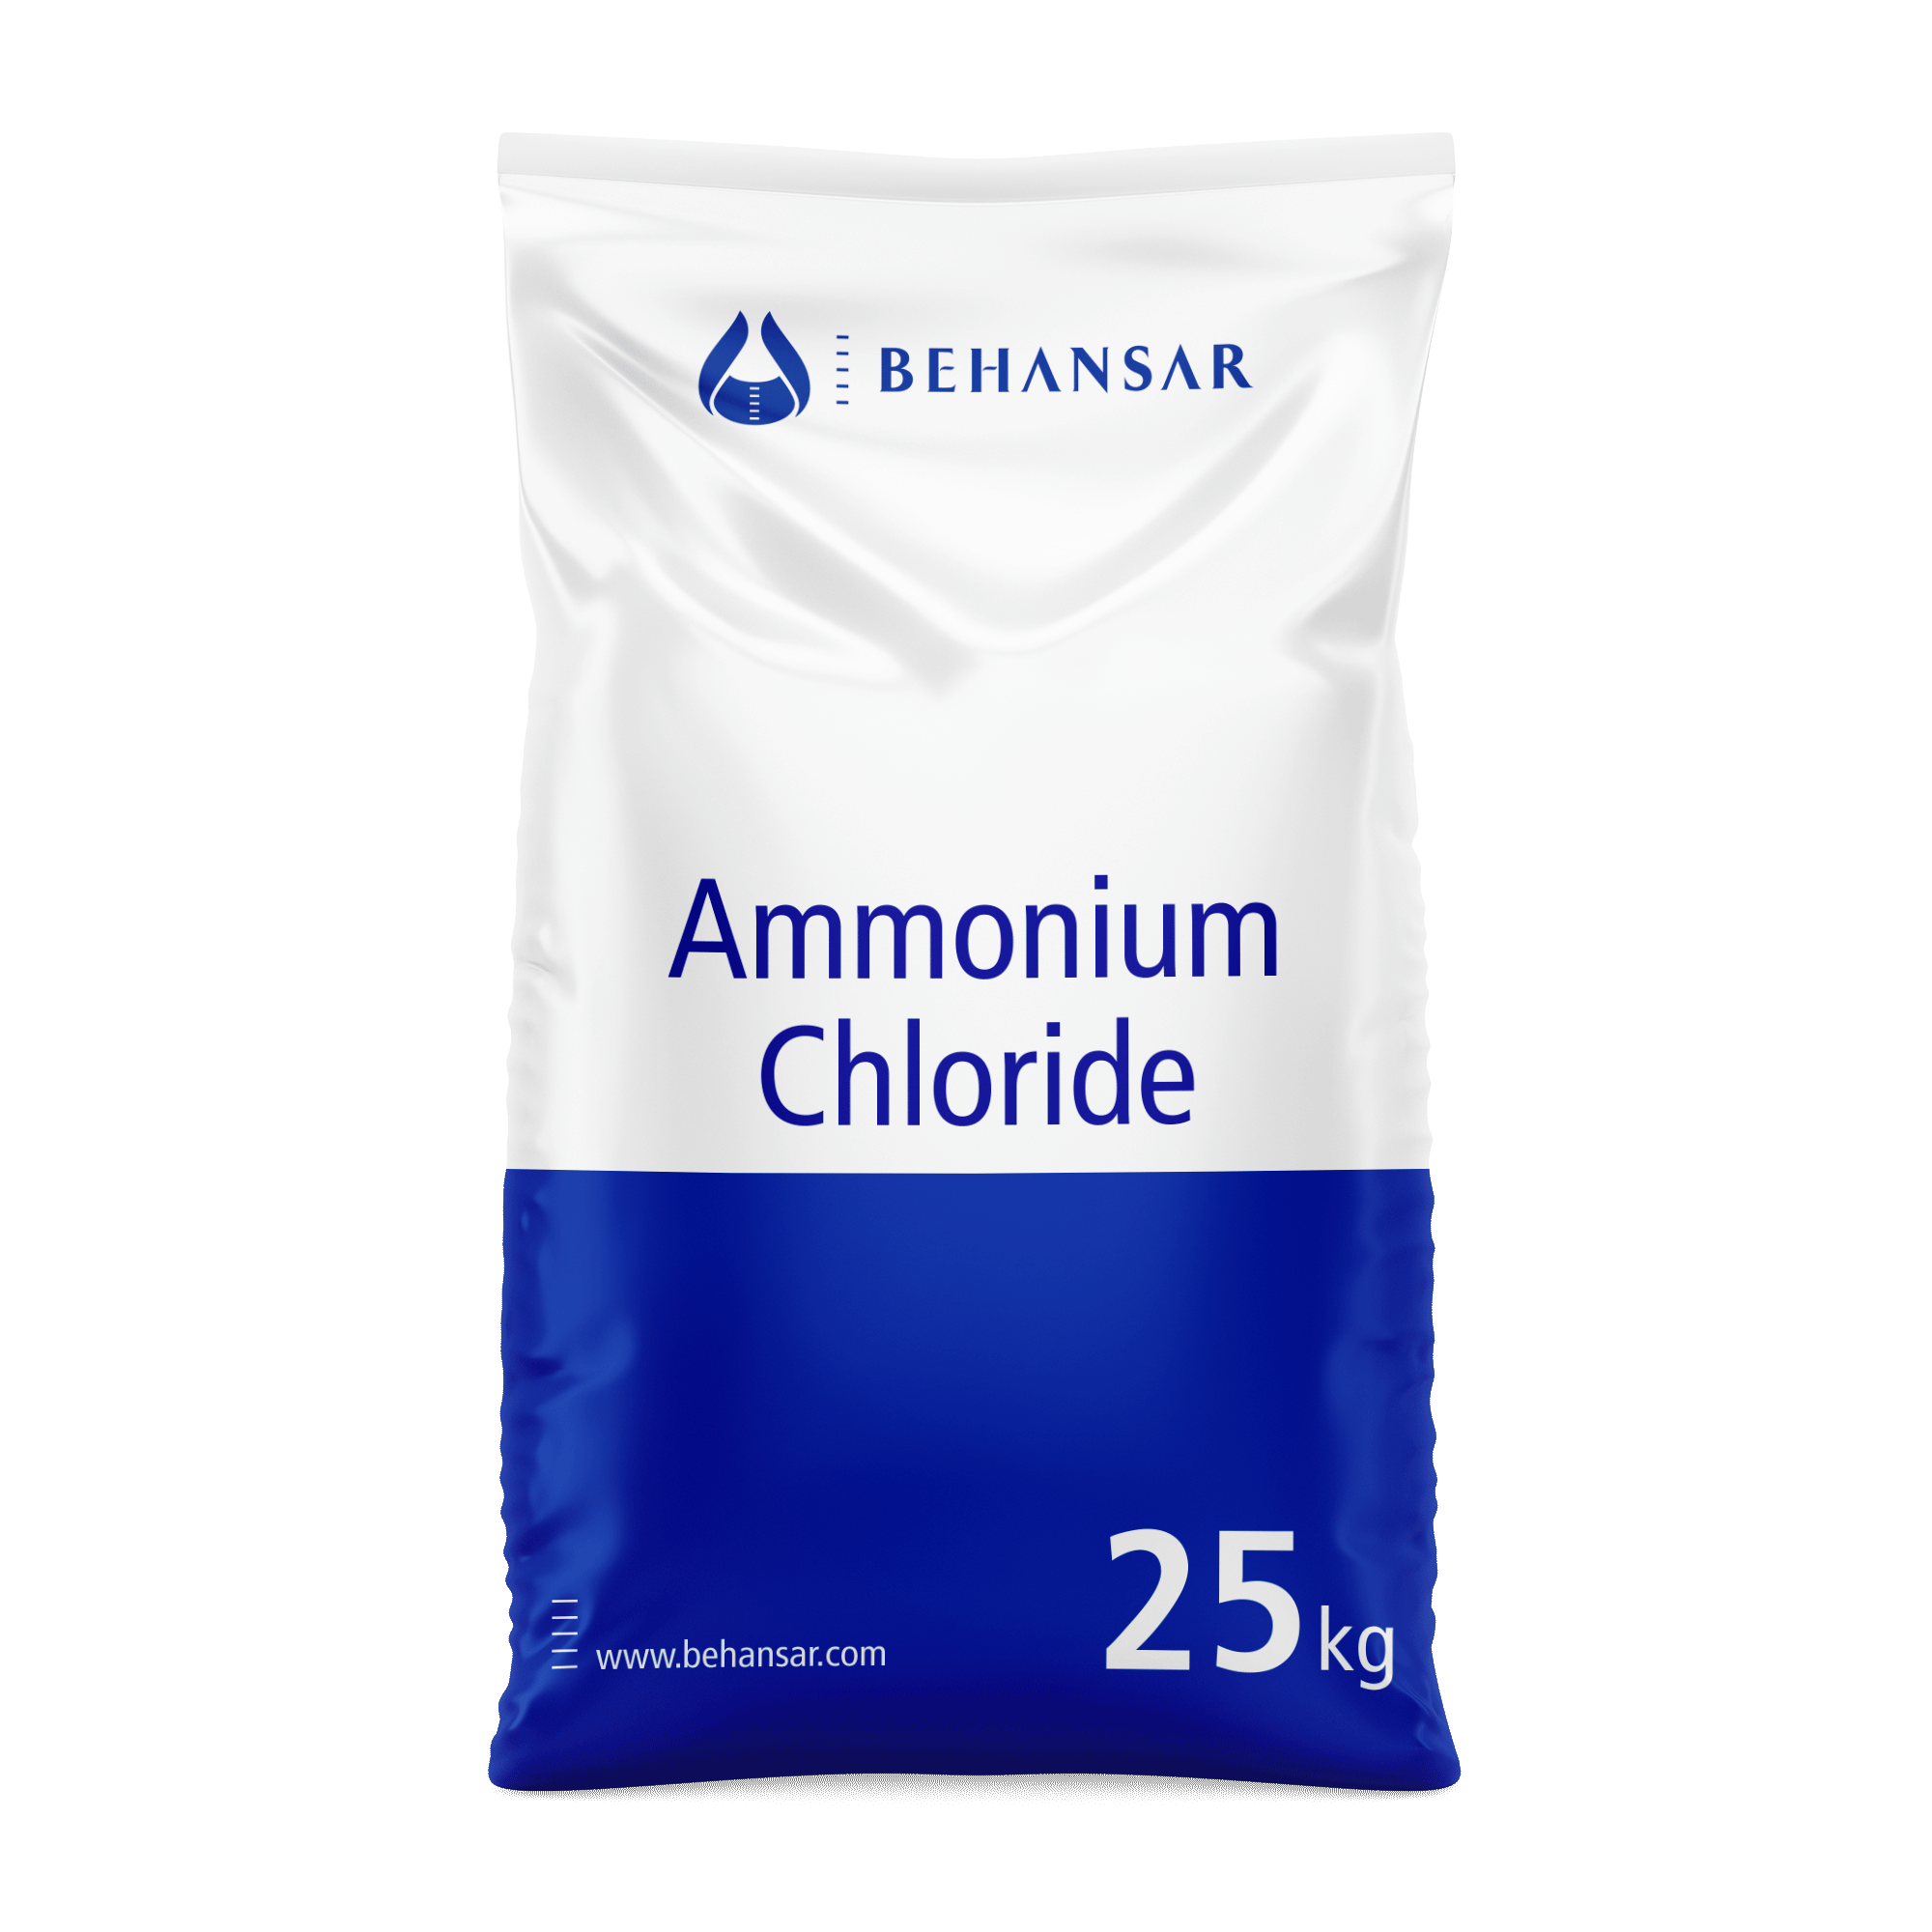 Ammonium Chloride is one of the products of Behansar Co